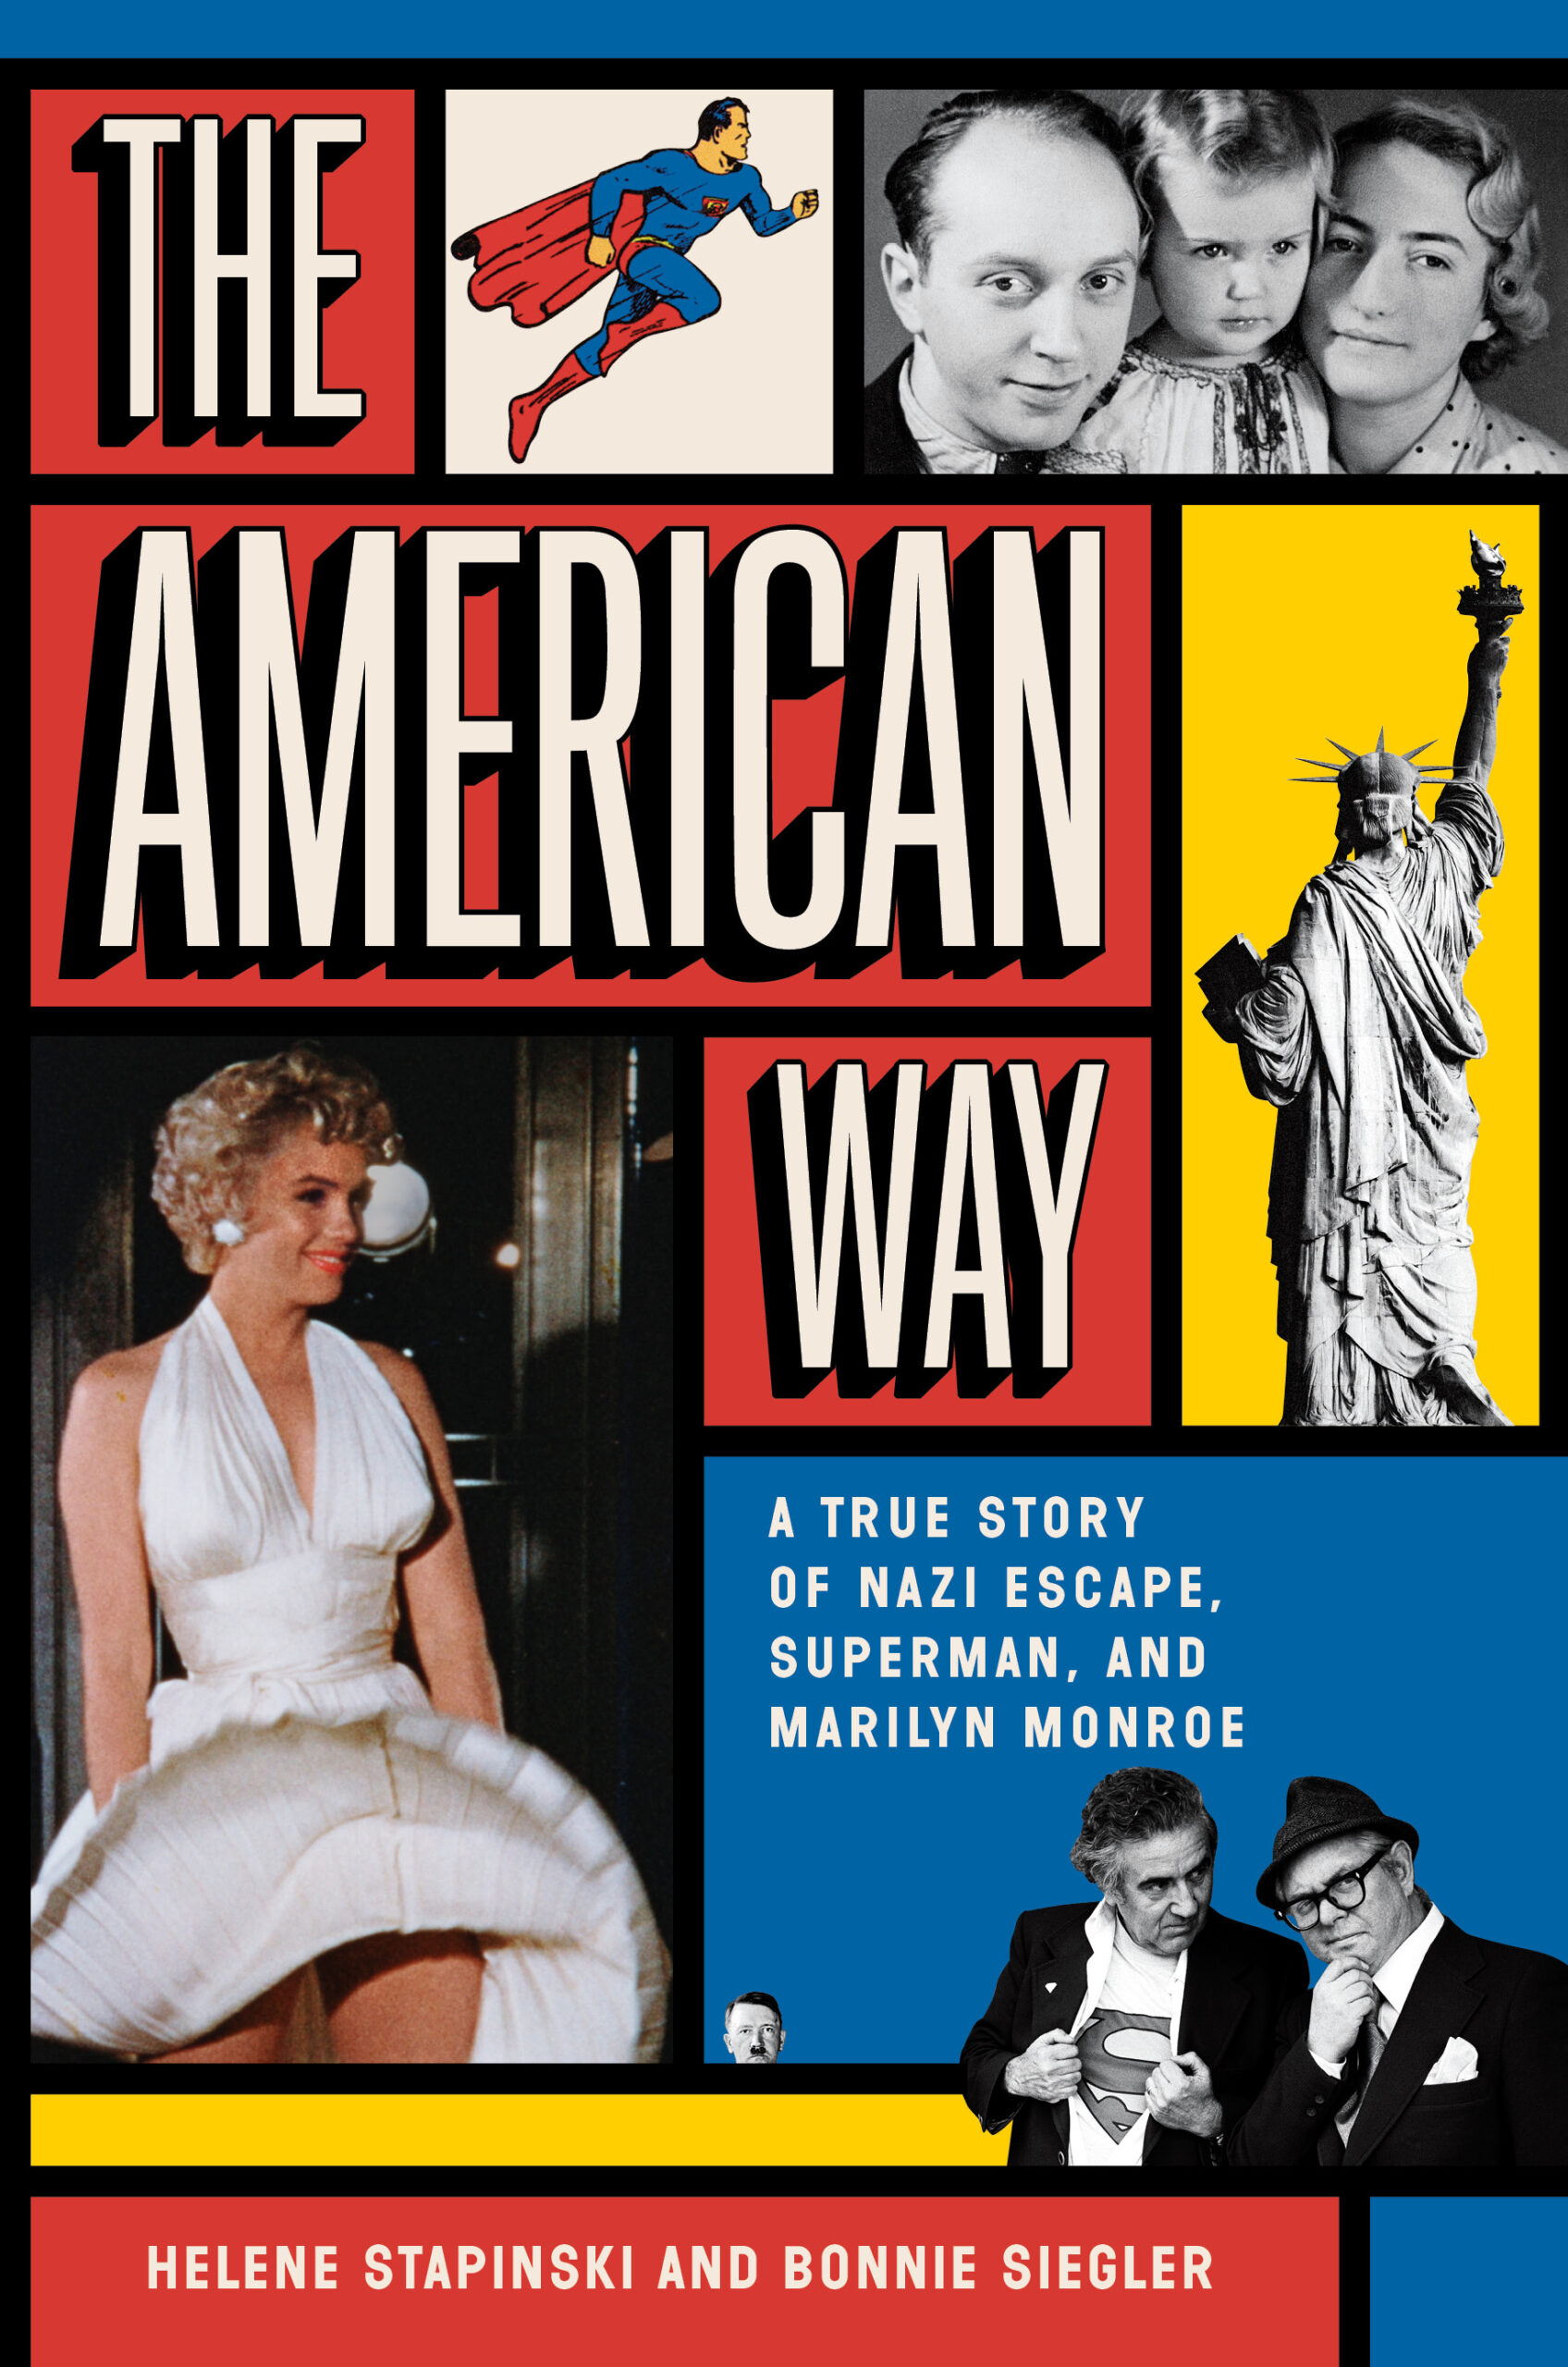 cover art for The American Way